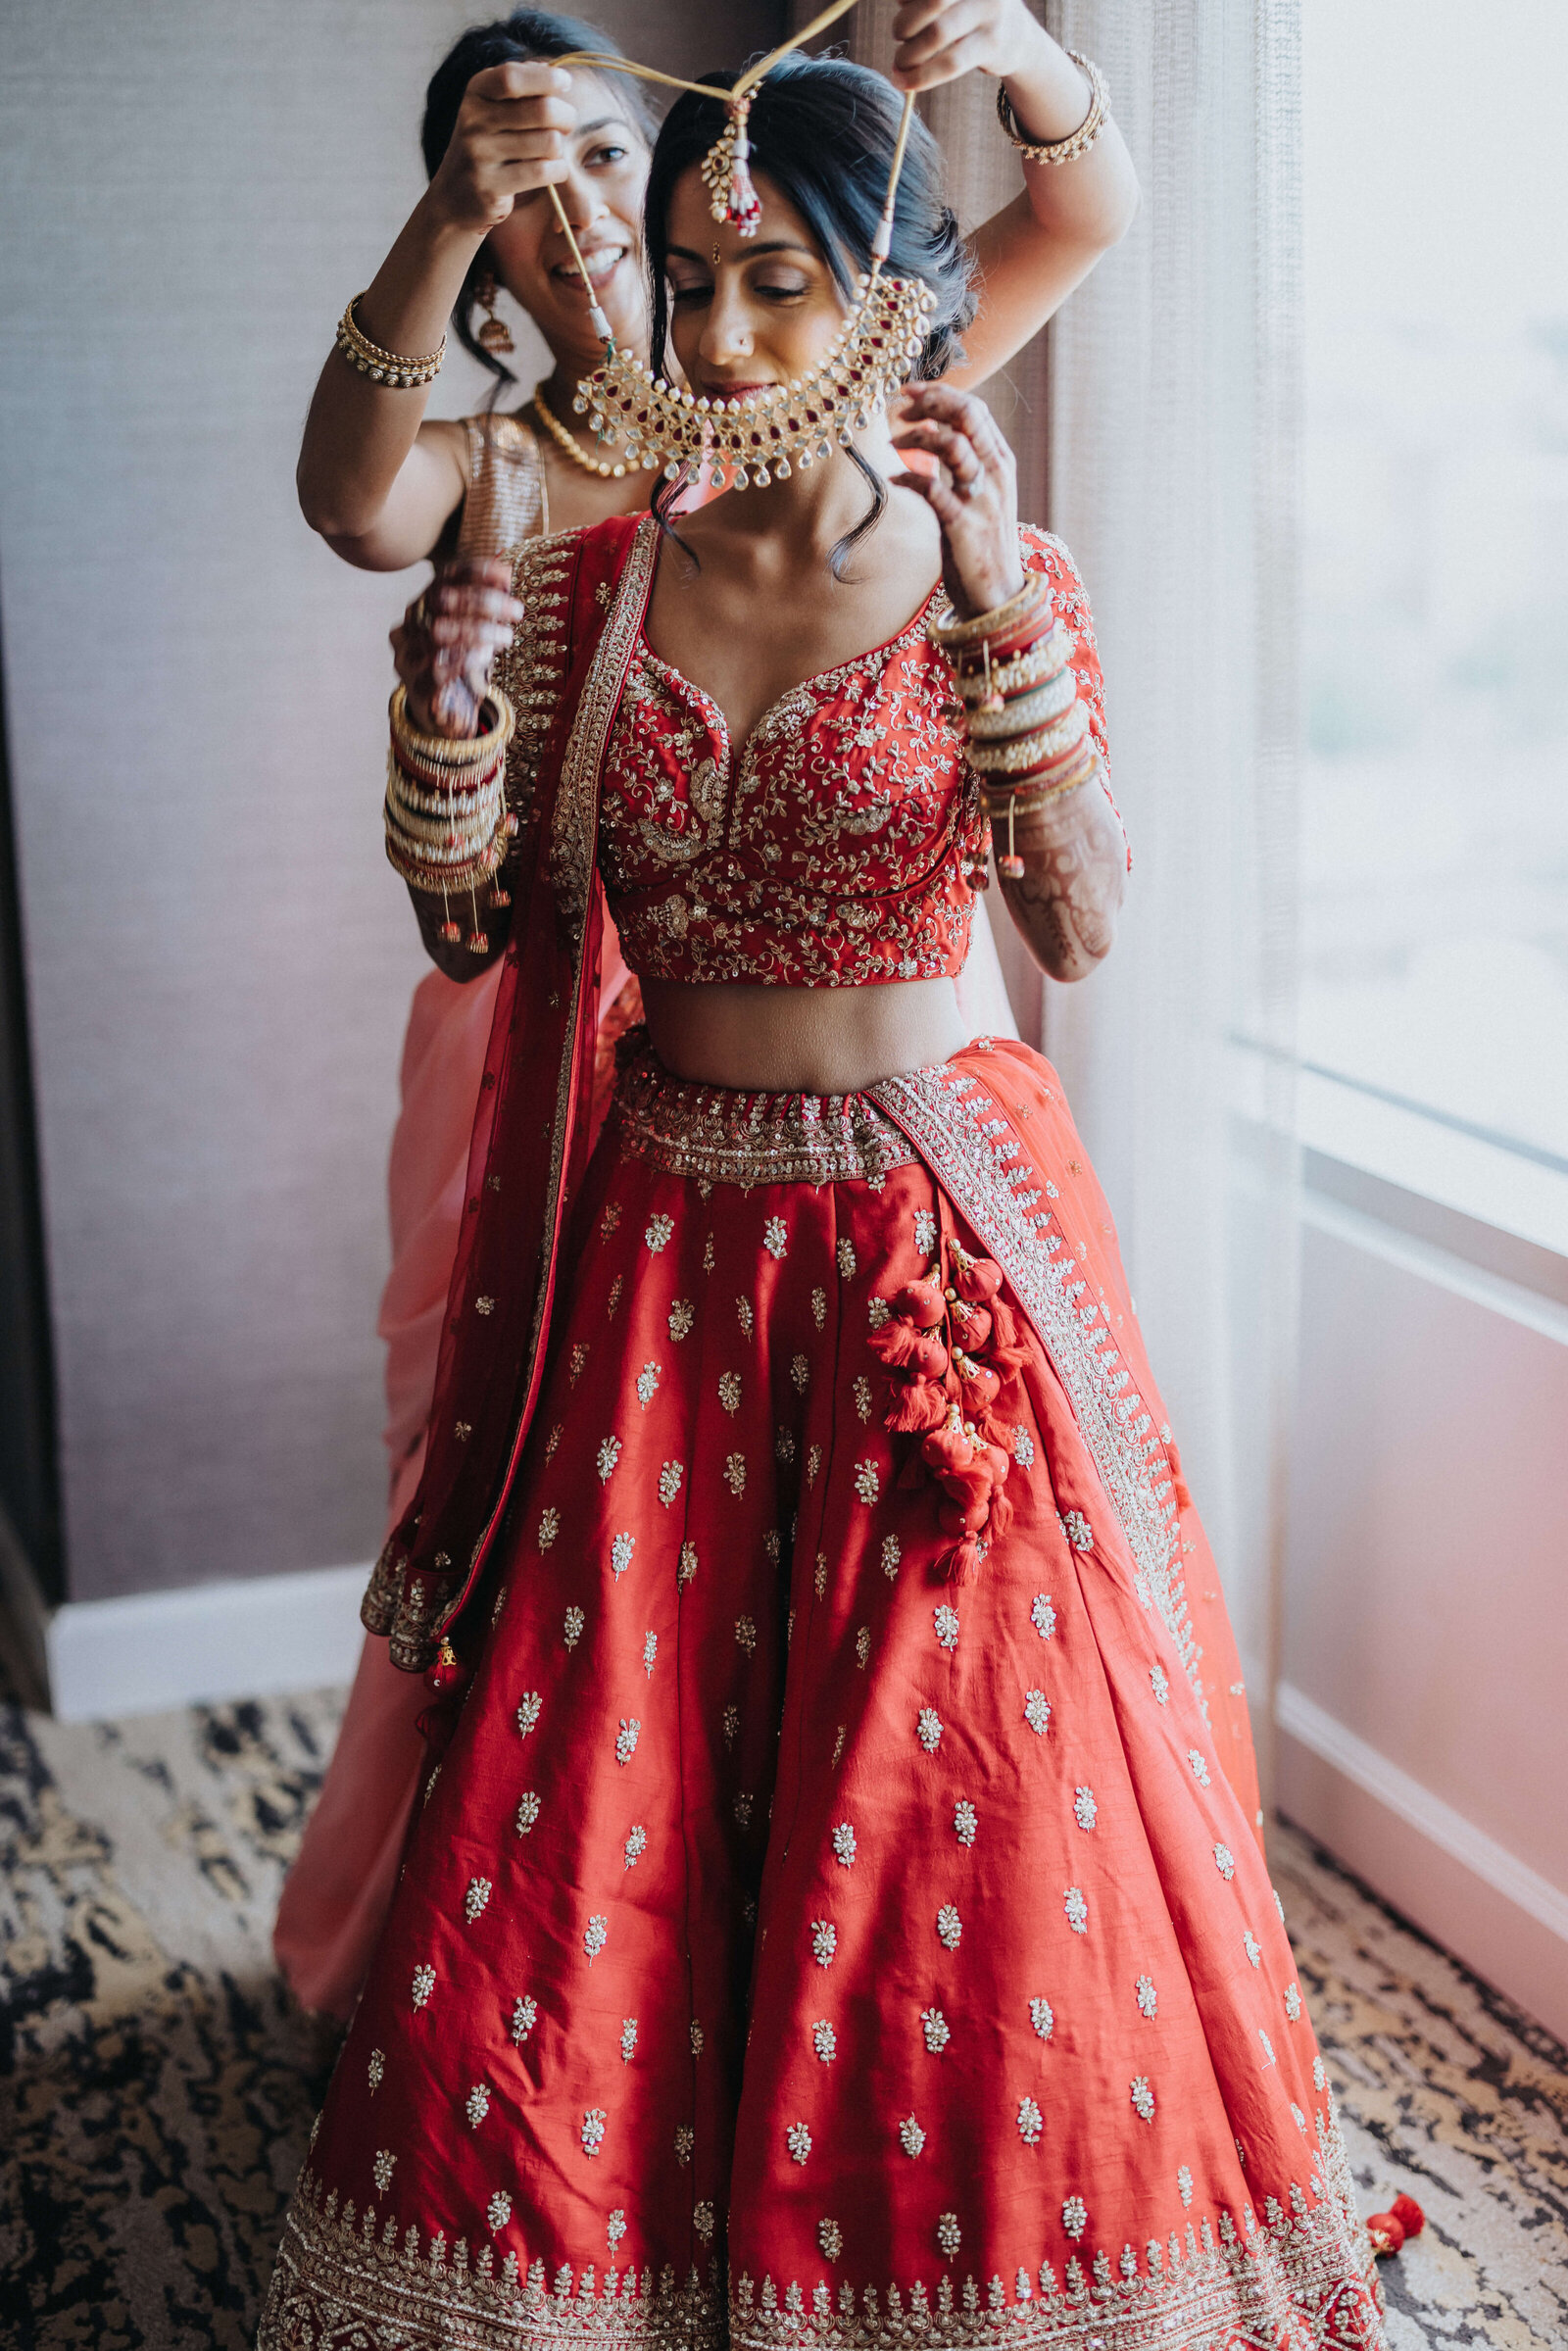 South asian bride in Lehenga with jewlery